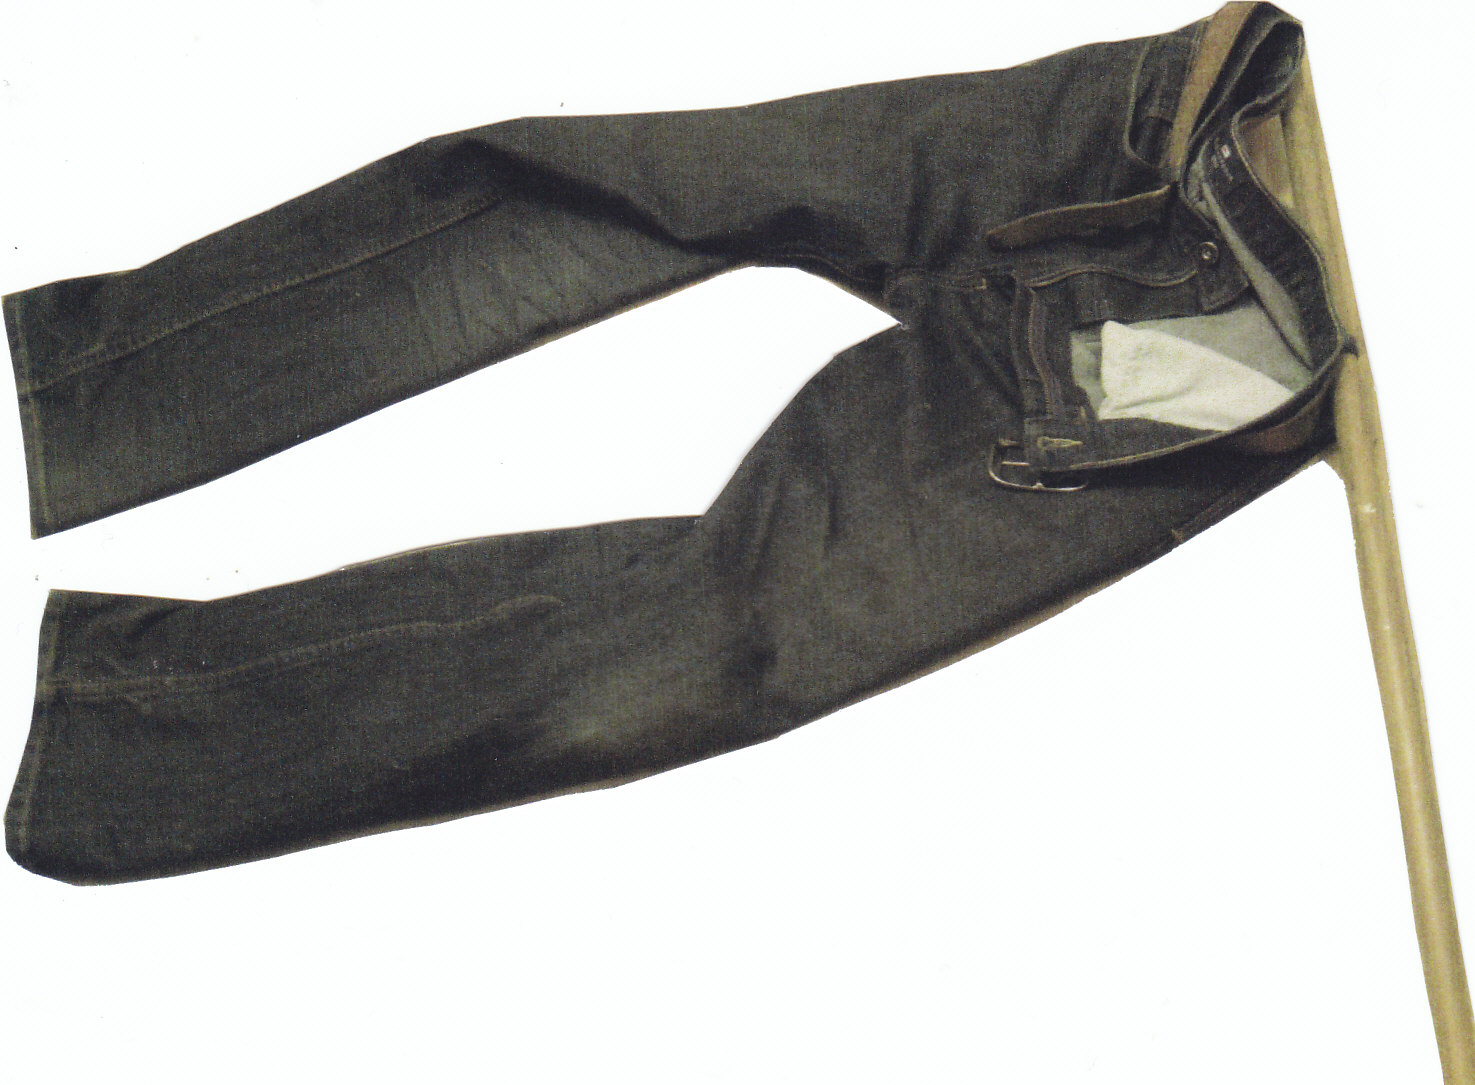 The Banner: a pair of jeans on a pole